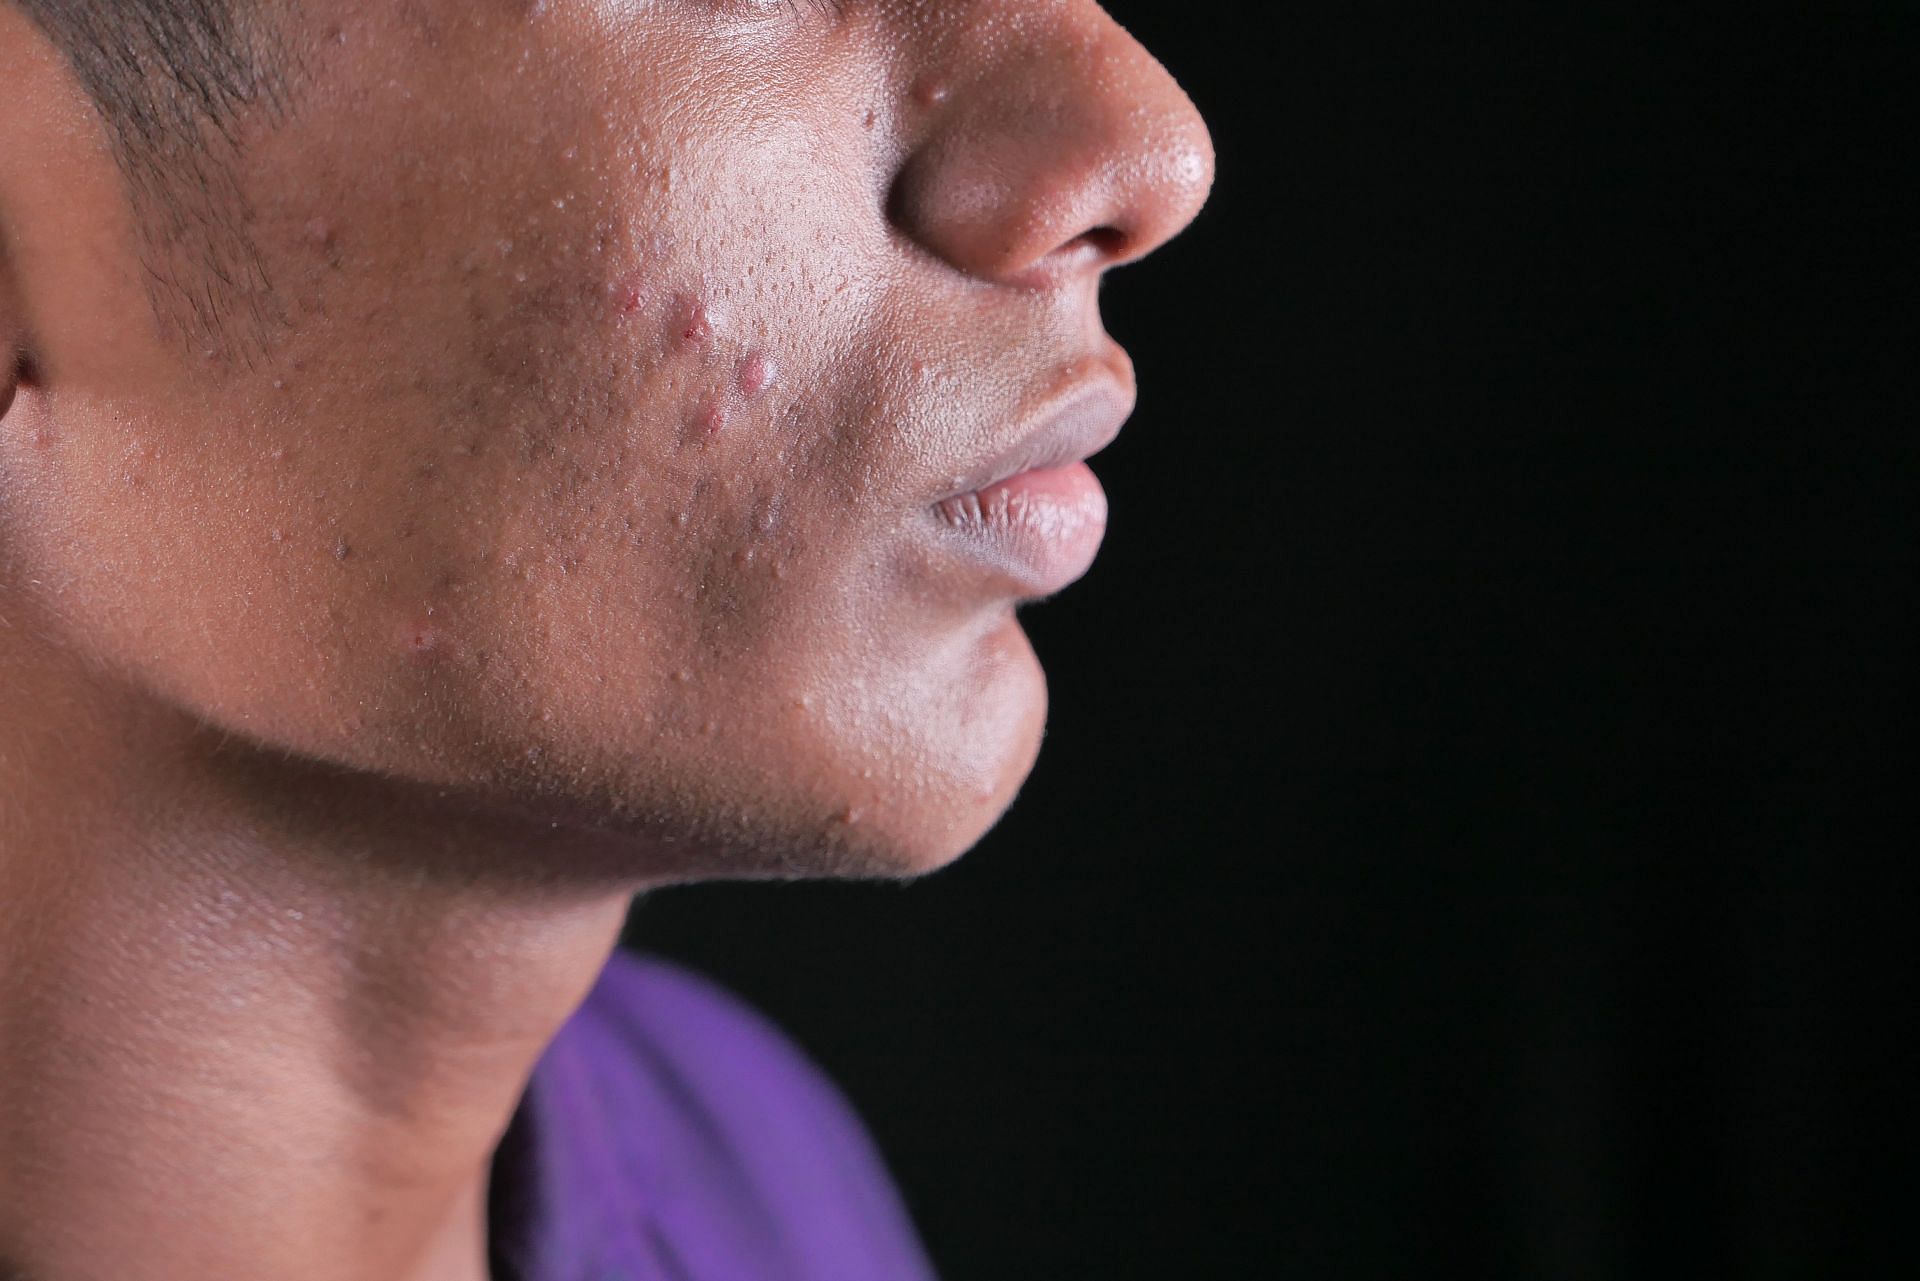 Clear bumps on skin could be causes by bacterial or viral infection. (Image via Pexels / Towfiqu Barbhuiya)